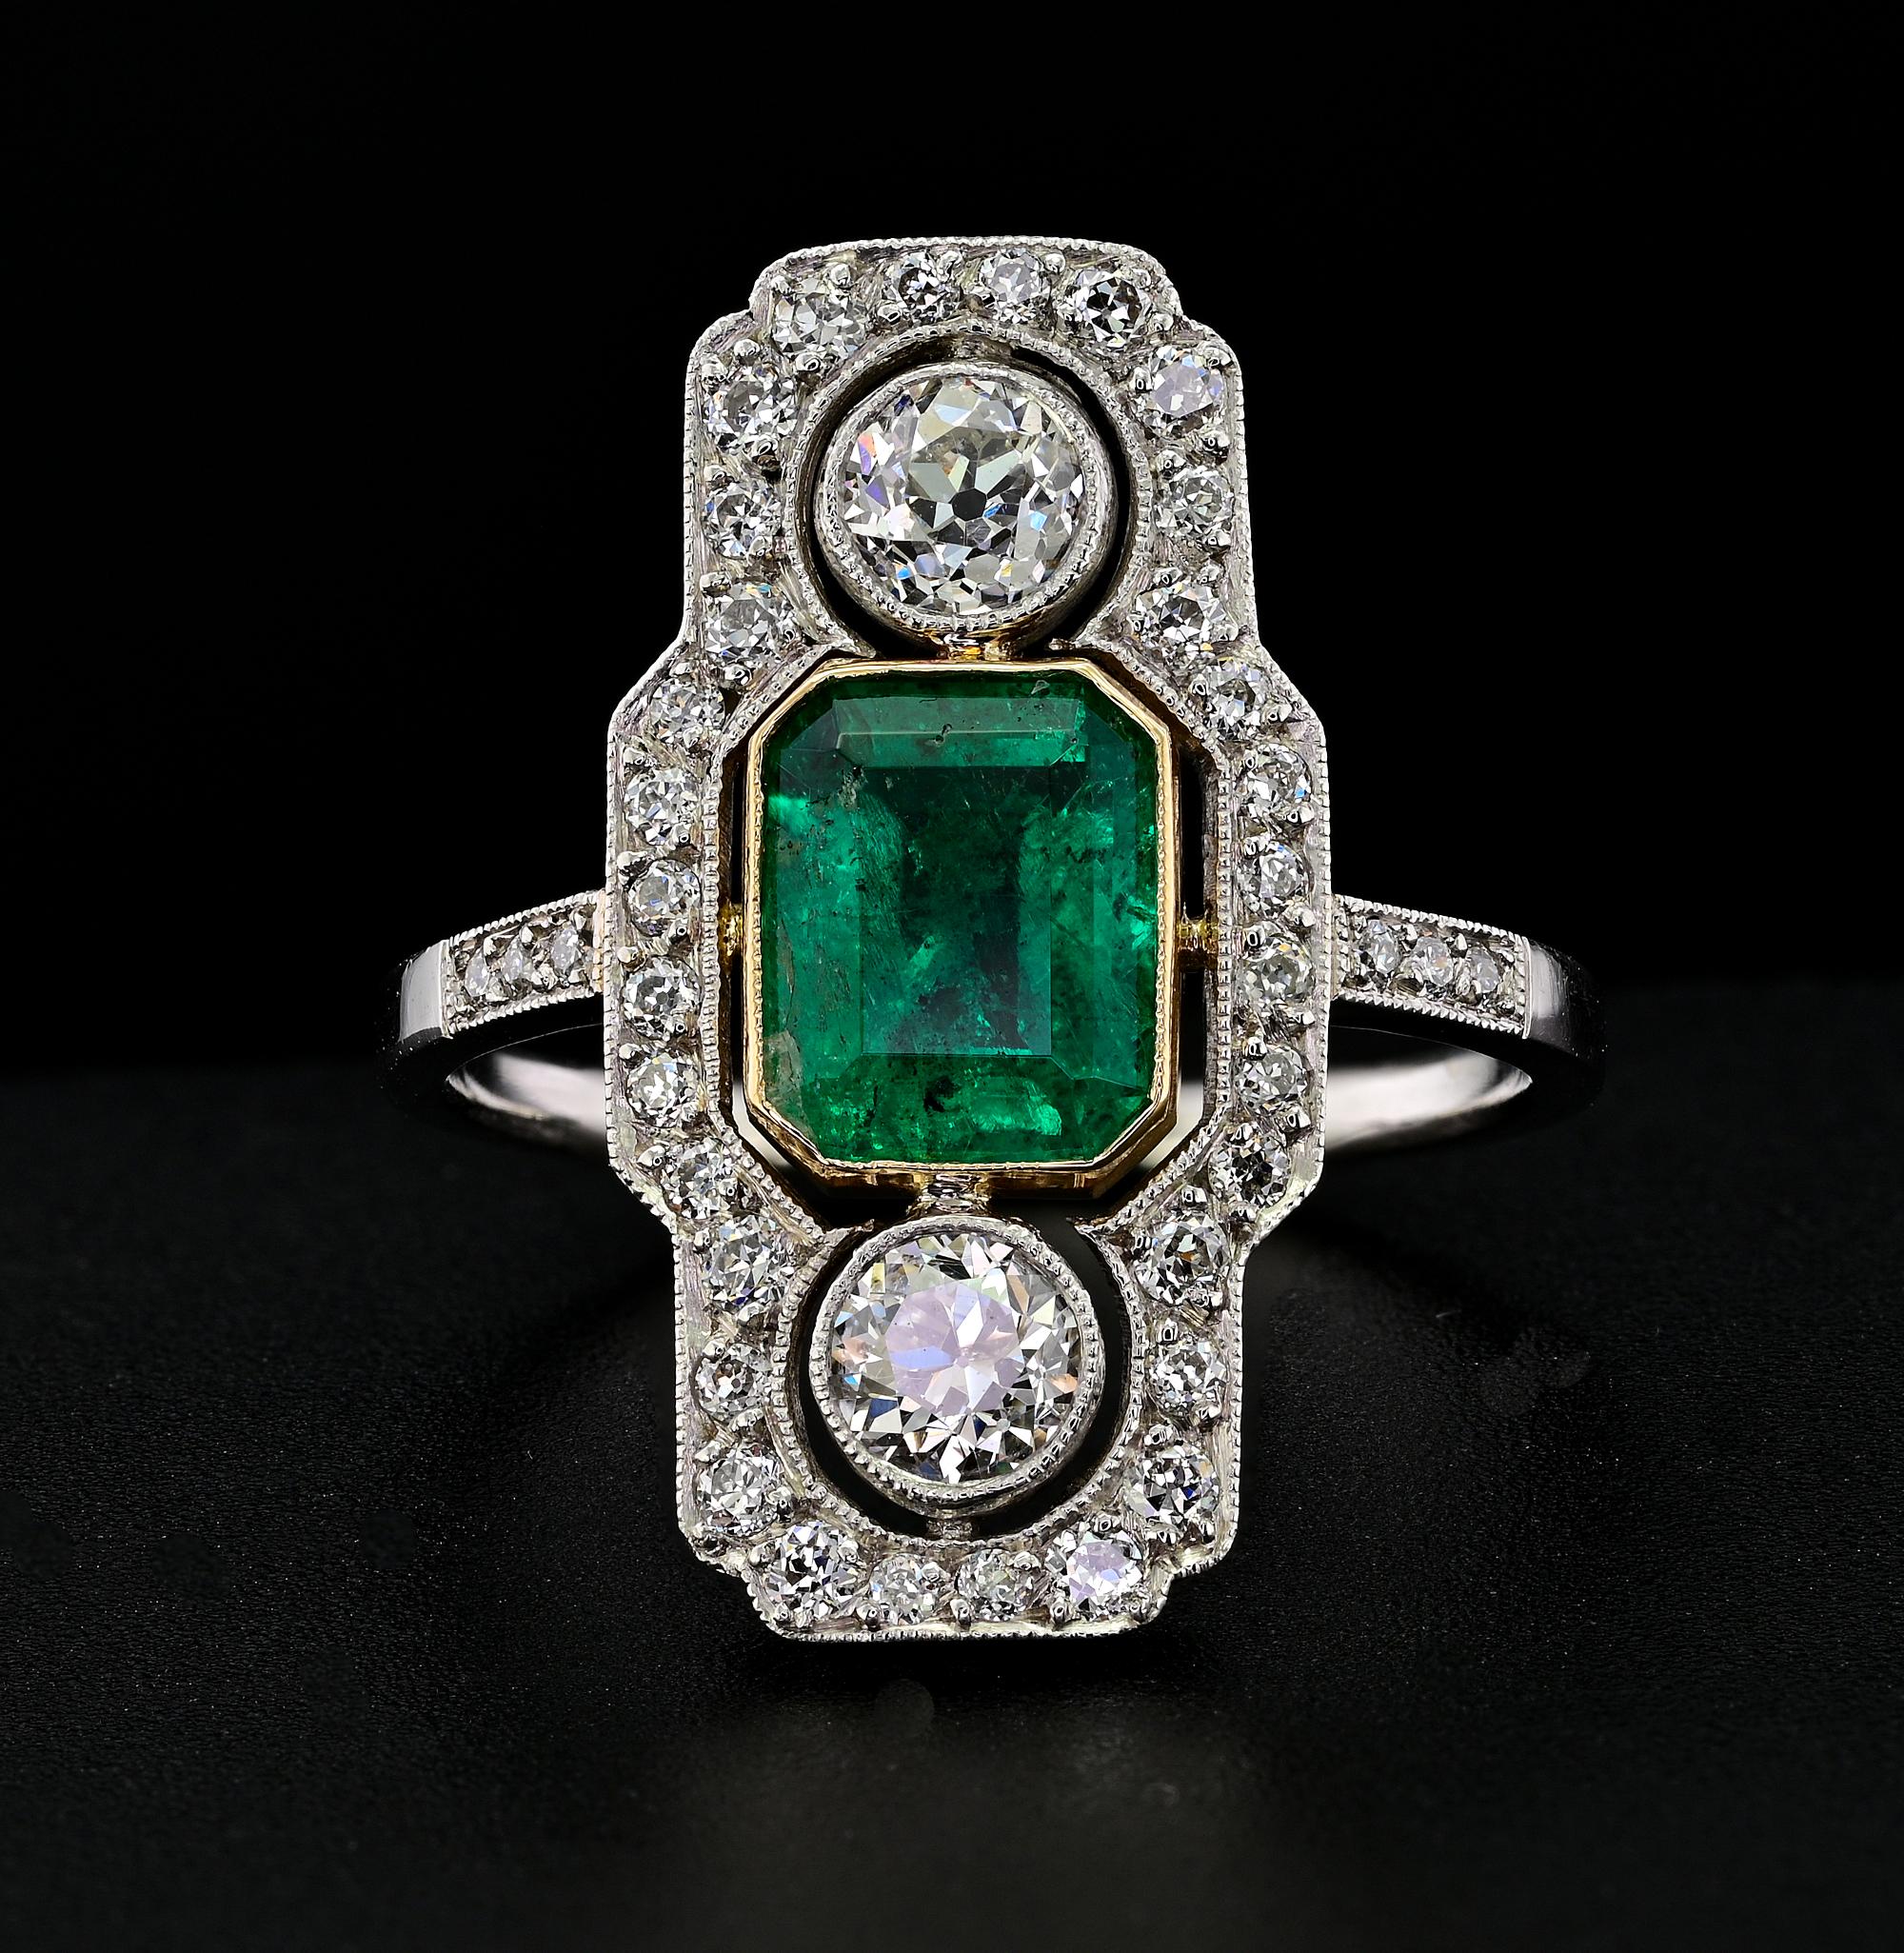 This outstanding Art Deco ring is 1920 circa
Hand crafted in a stunning sophisticate design of solid Platinum
The ring is modeled in geometric panel shape as epitome of the Art Deco elegance
Centrally set with a vibrant Blue Green Colombian Emerald,